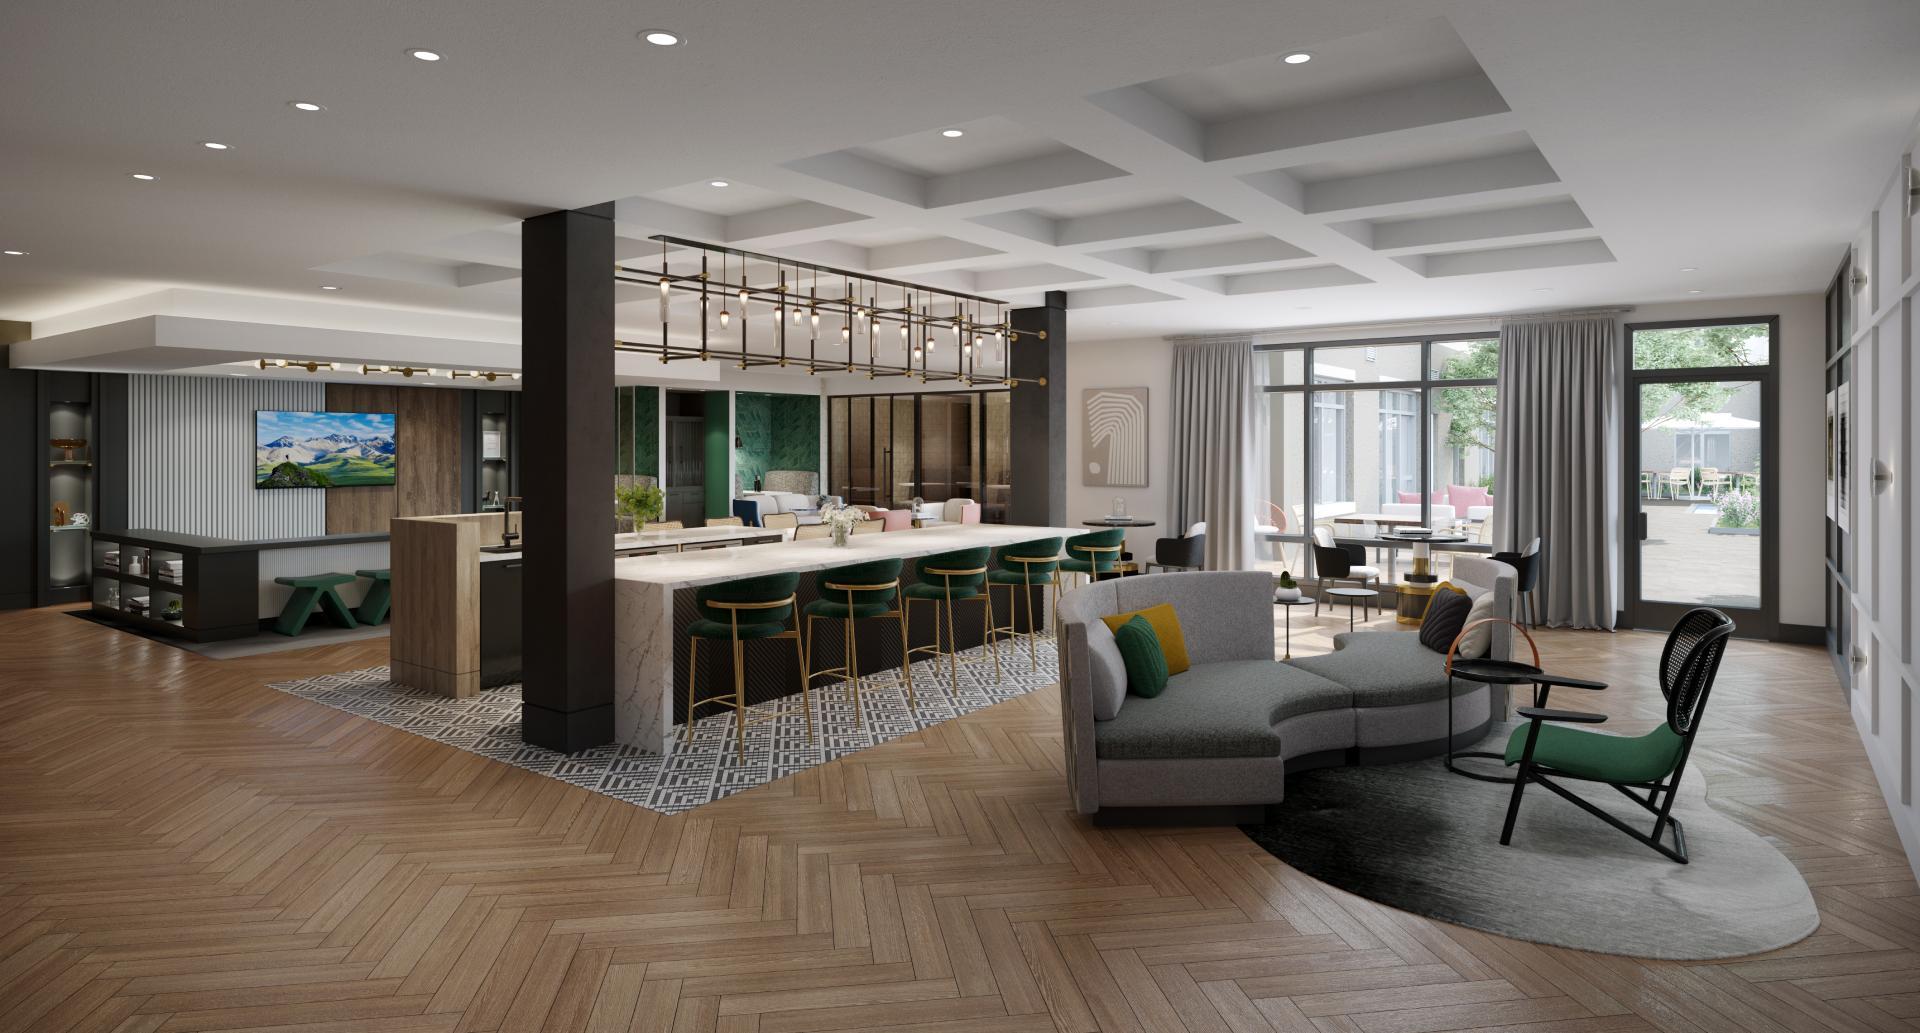 A rendering of a Coulter Place lounge space with bar seating and exhibition kitchen